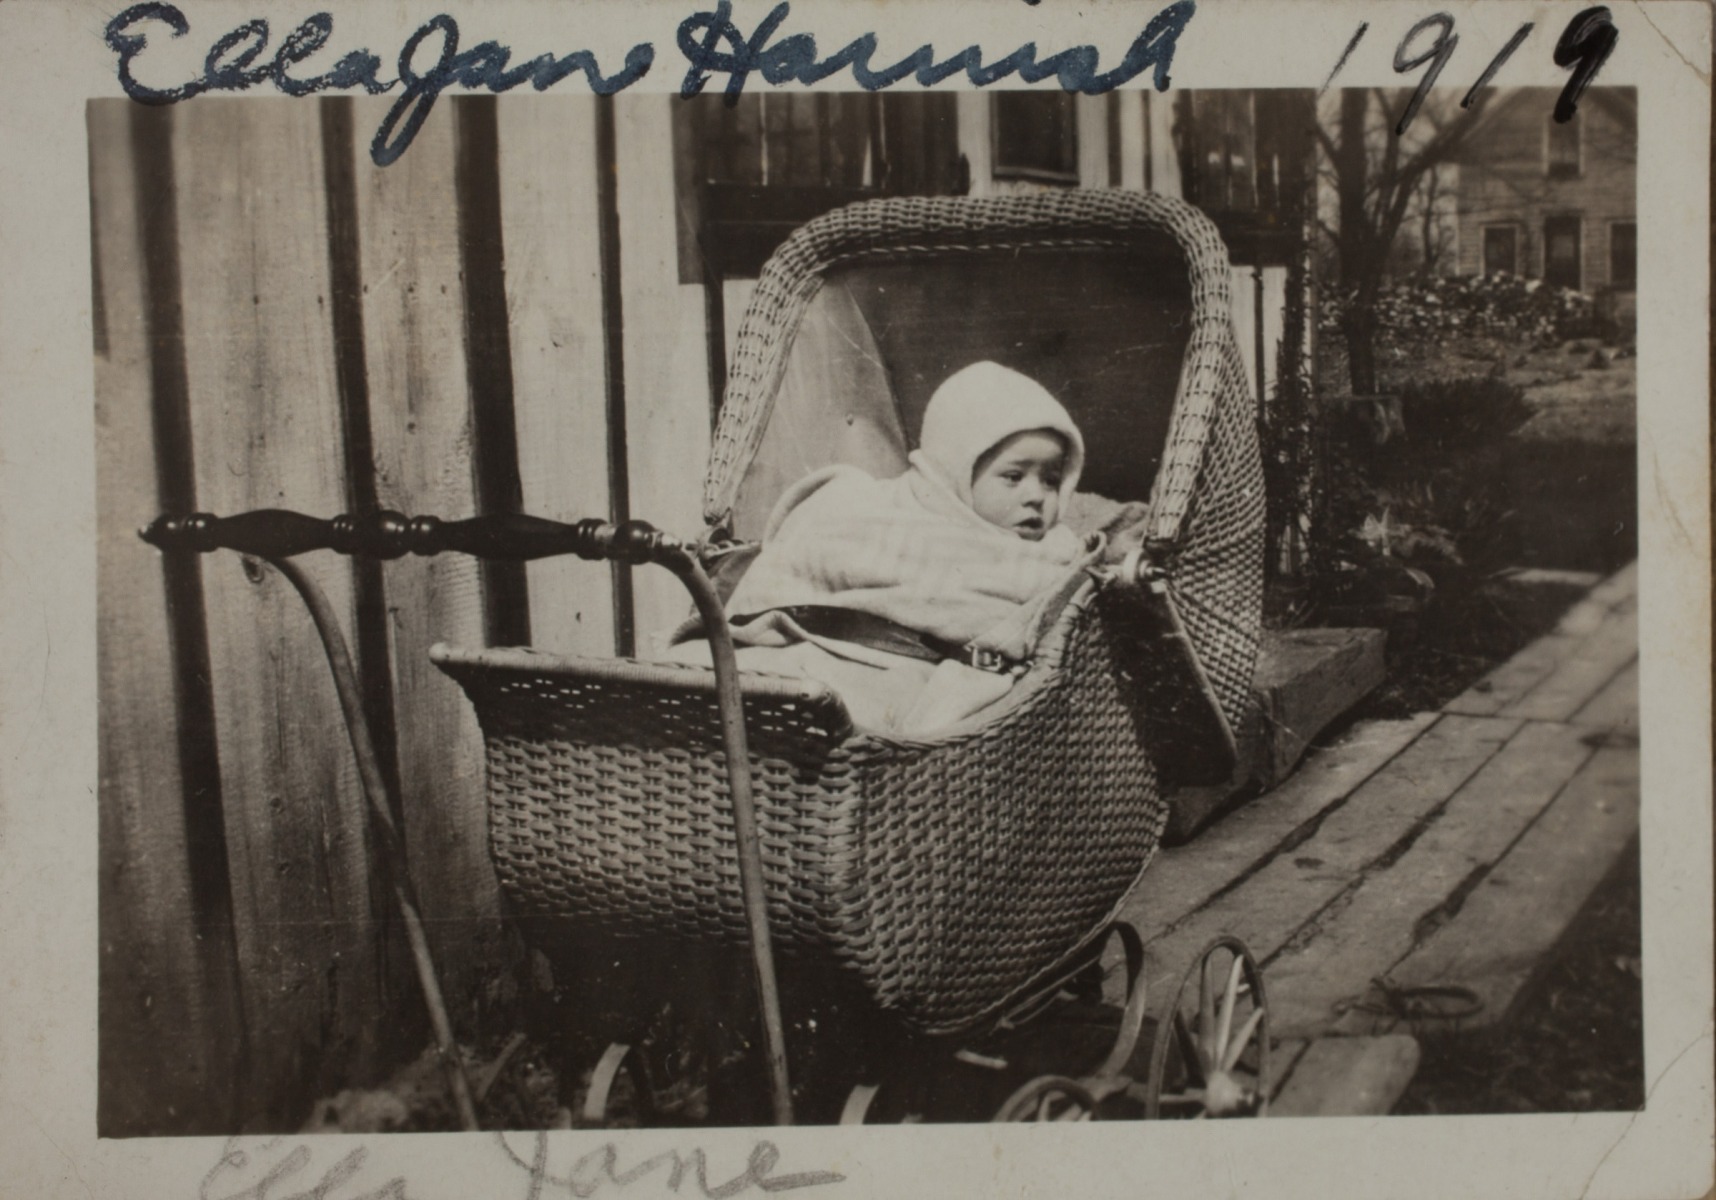 1919 Ella Jane Harnish" in baby buggy on wooden walkway. note she is strapped in with a belt.